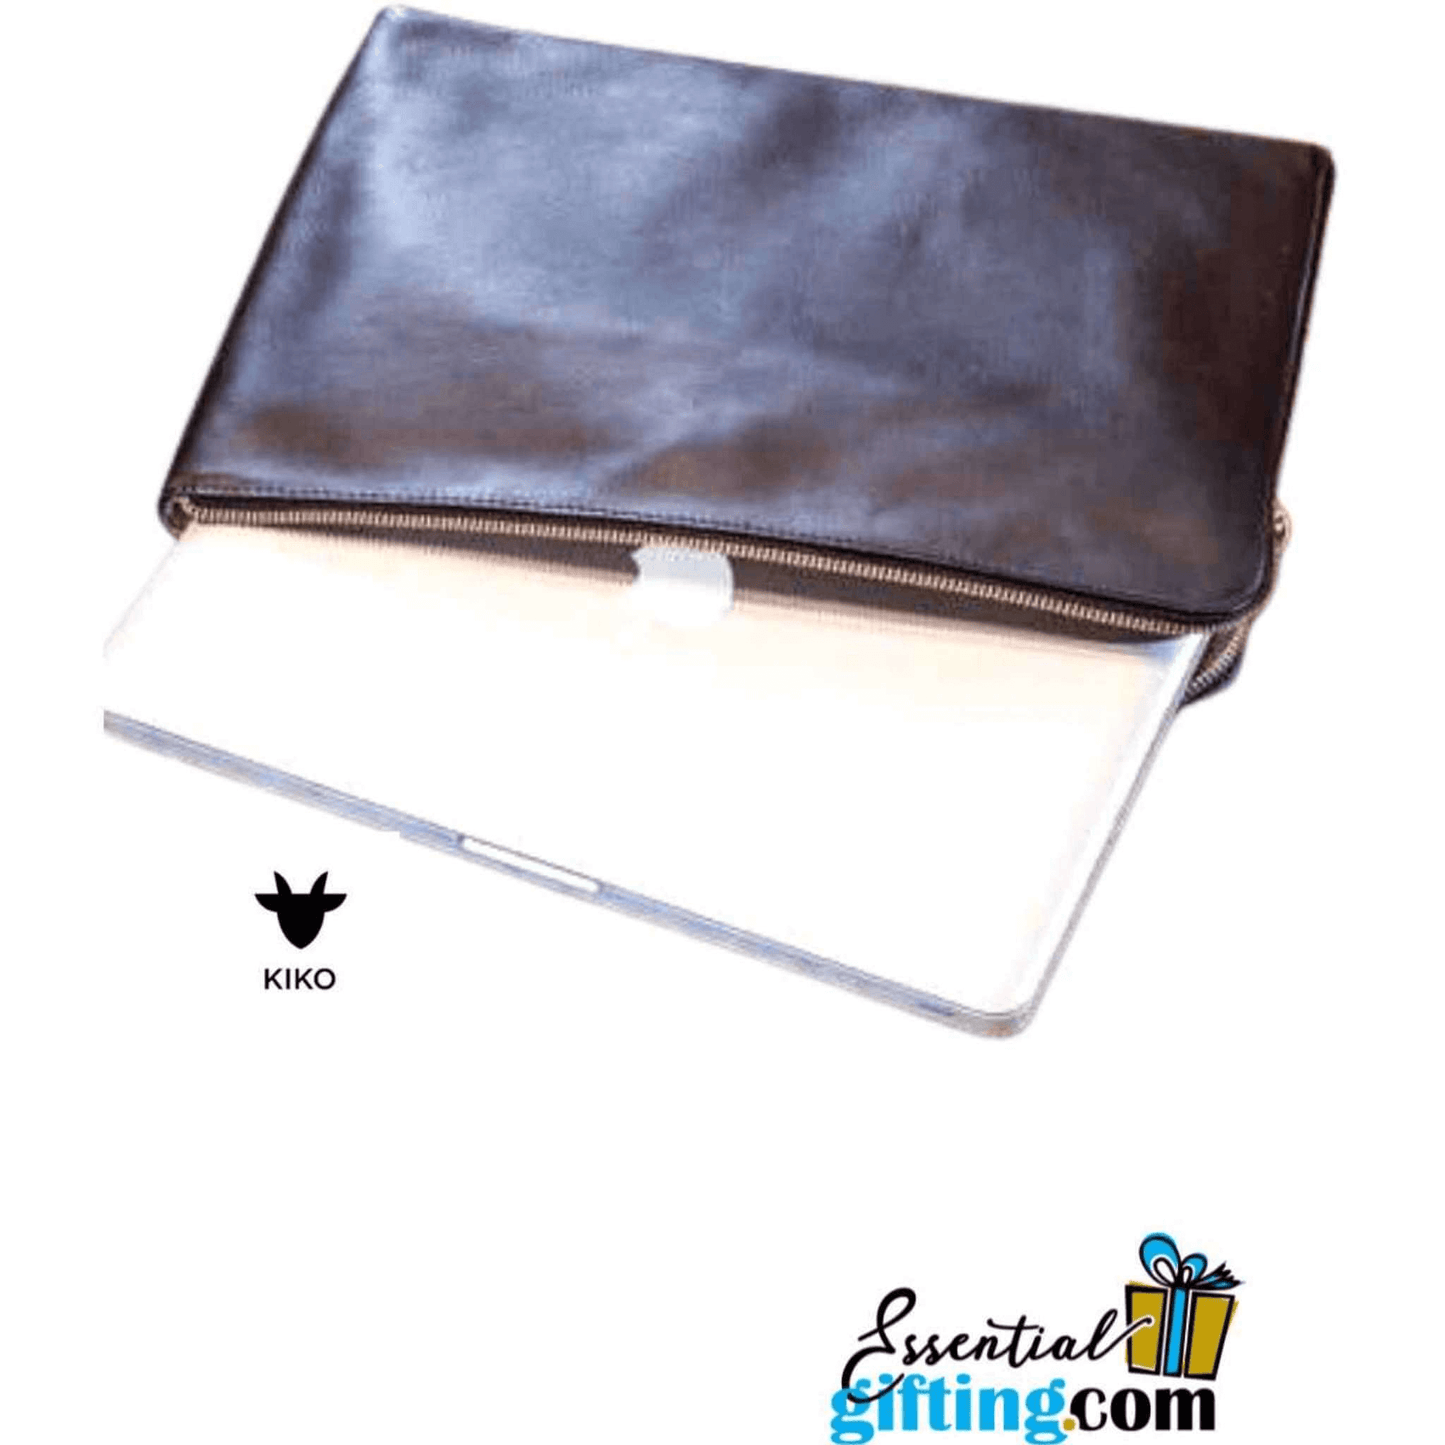 https://essentialgifting.com/products/laptop-zippered-leather-folio